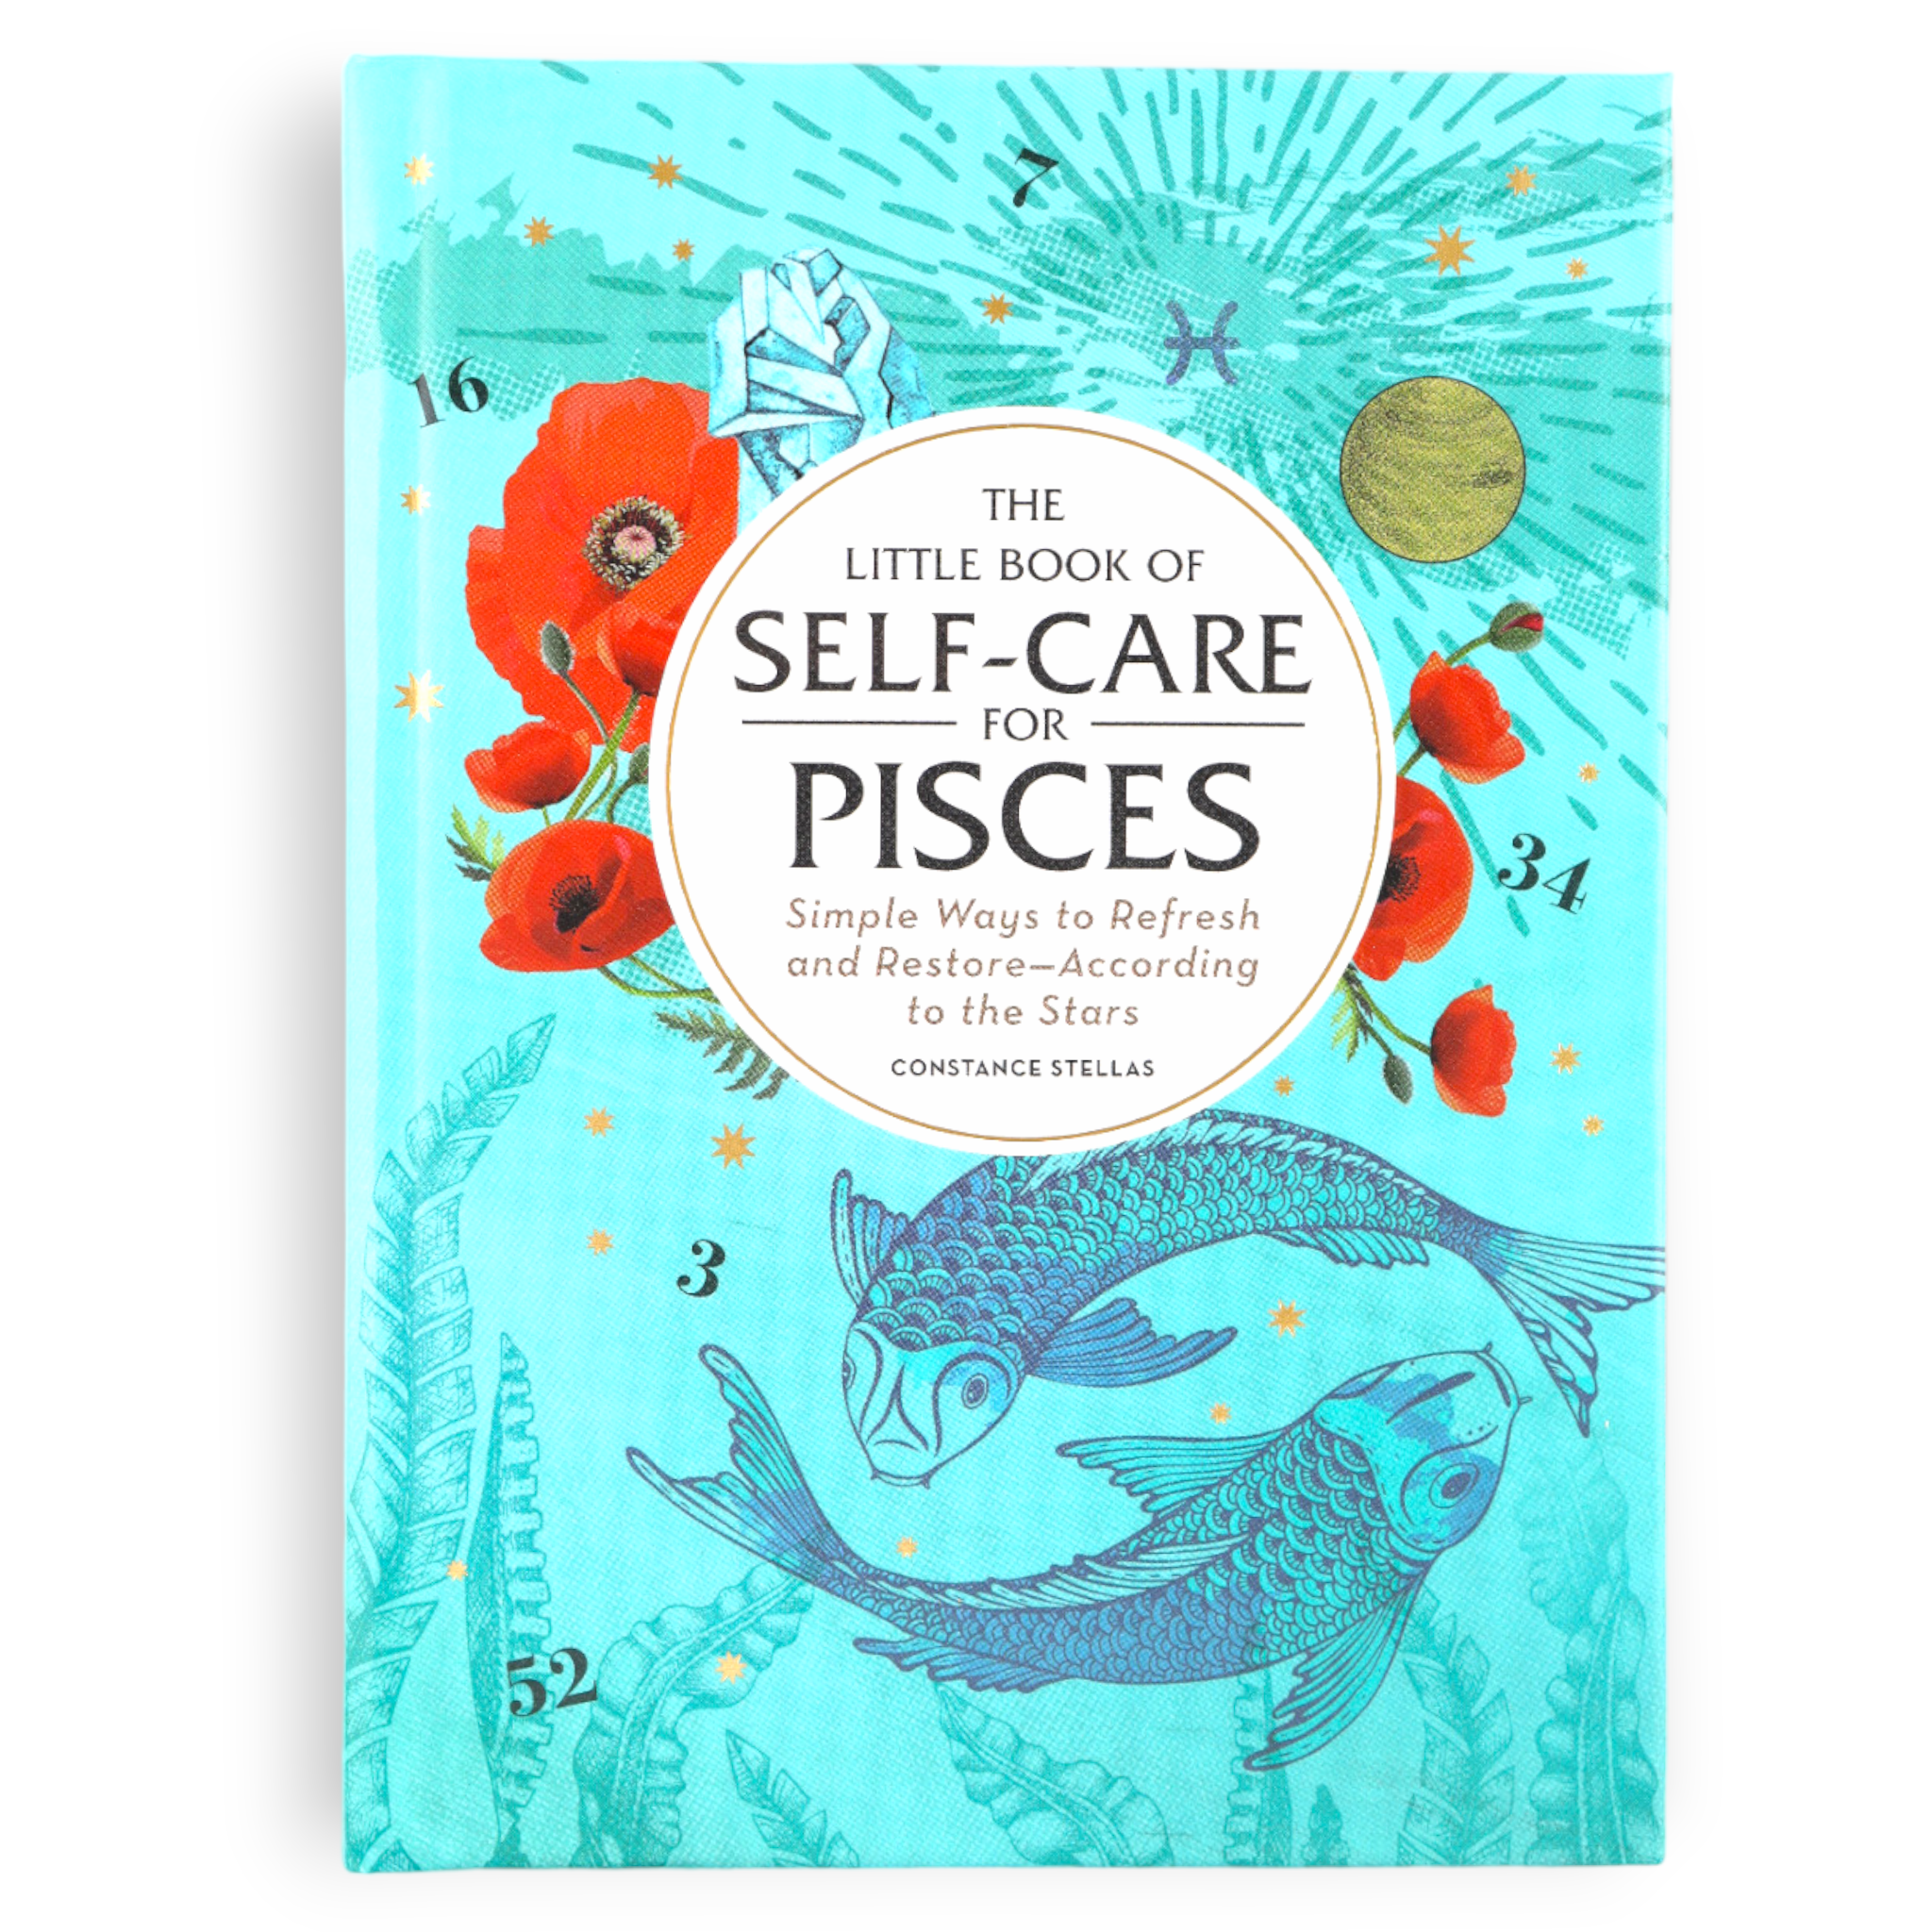 Self-care for Pisces